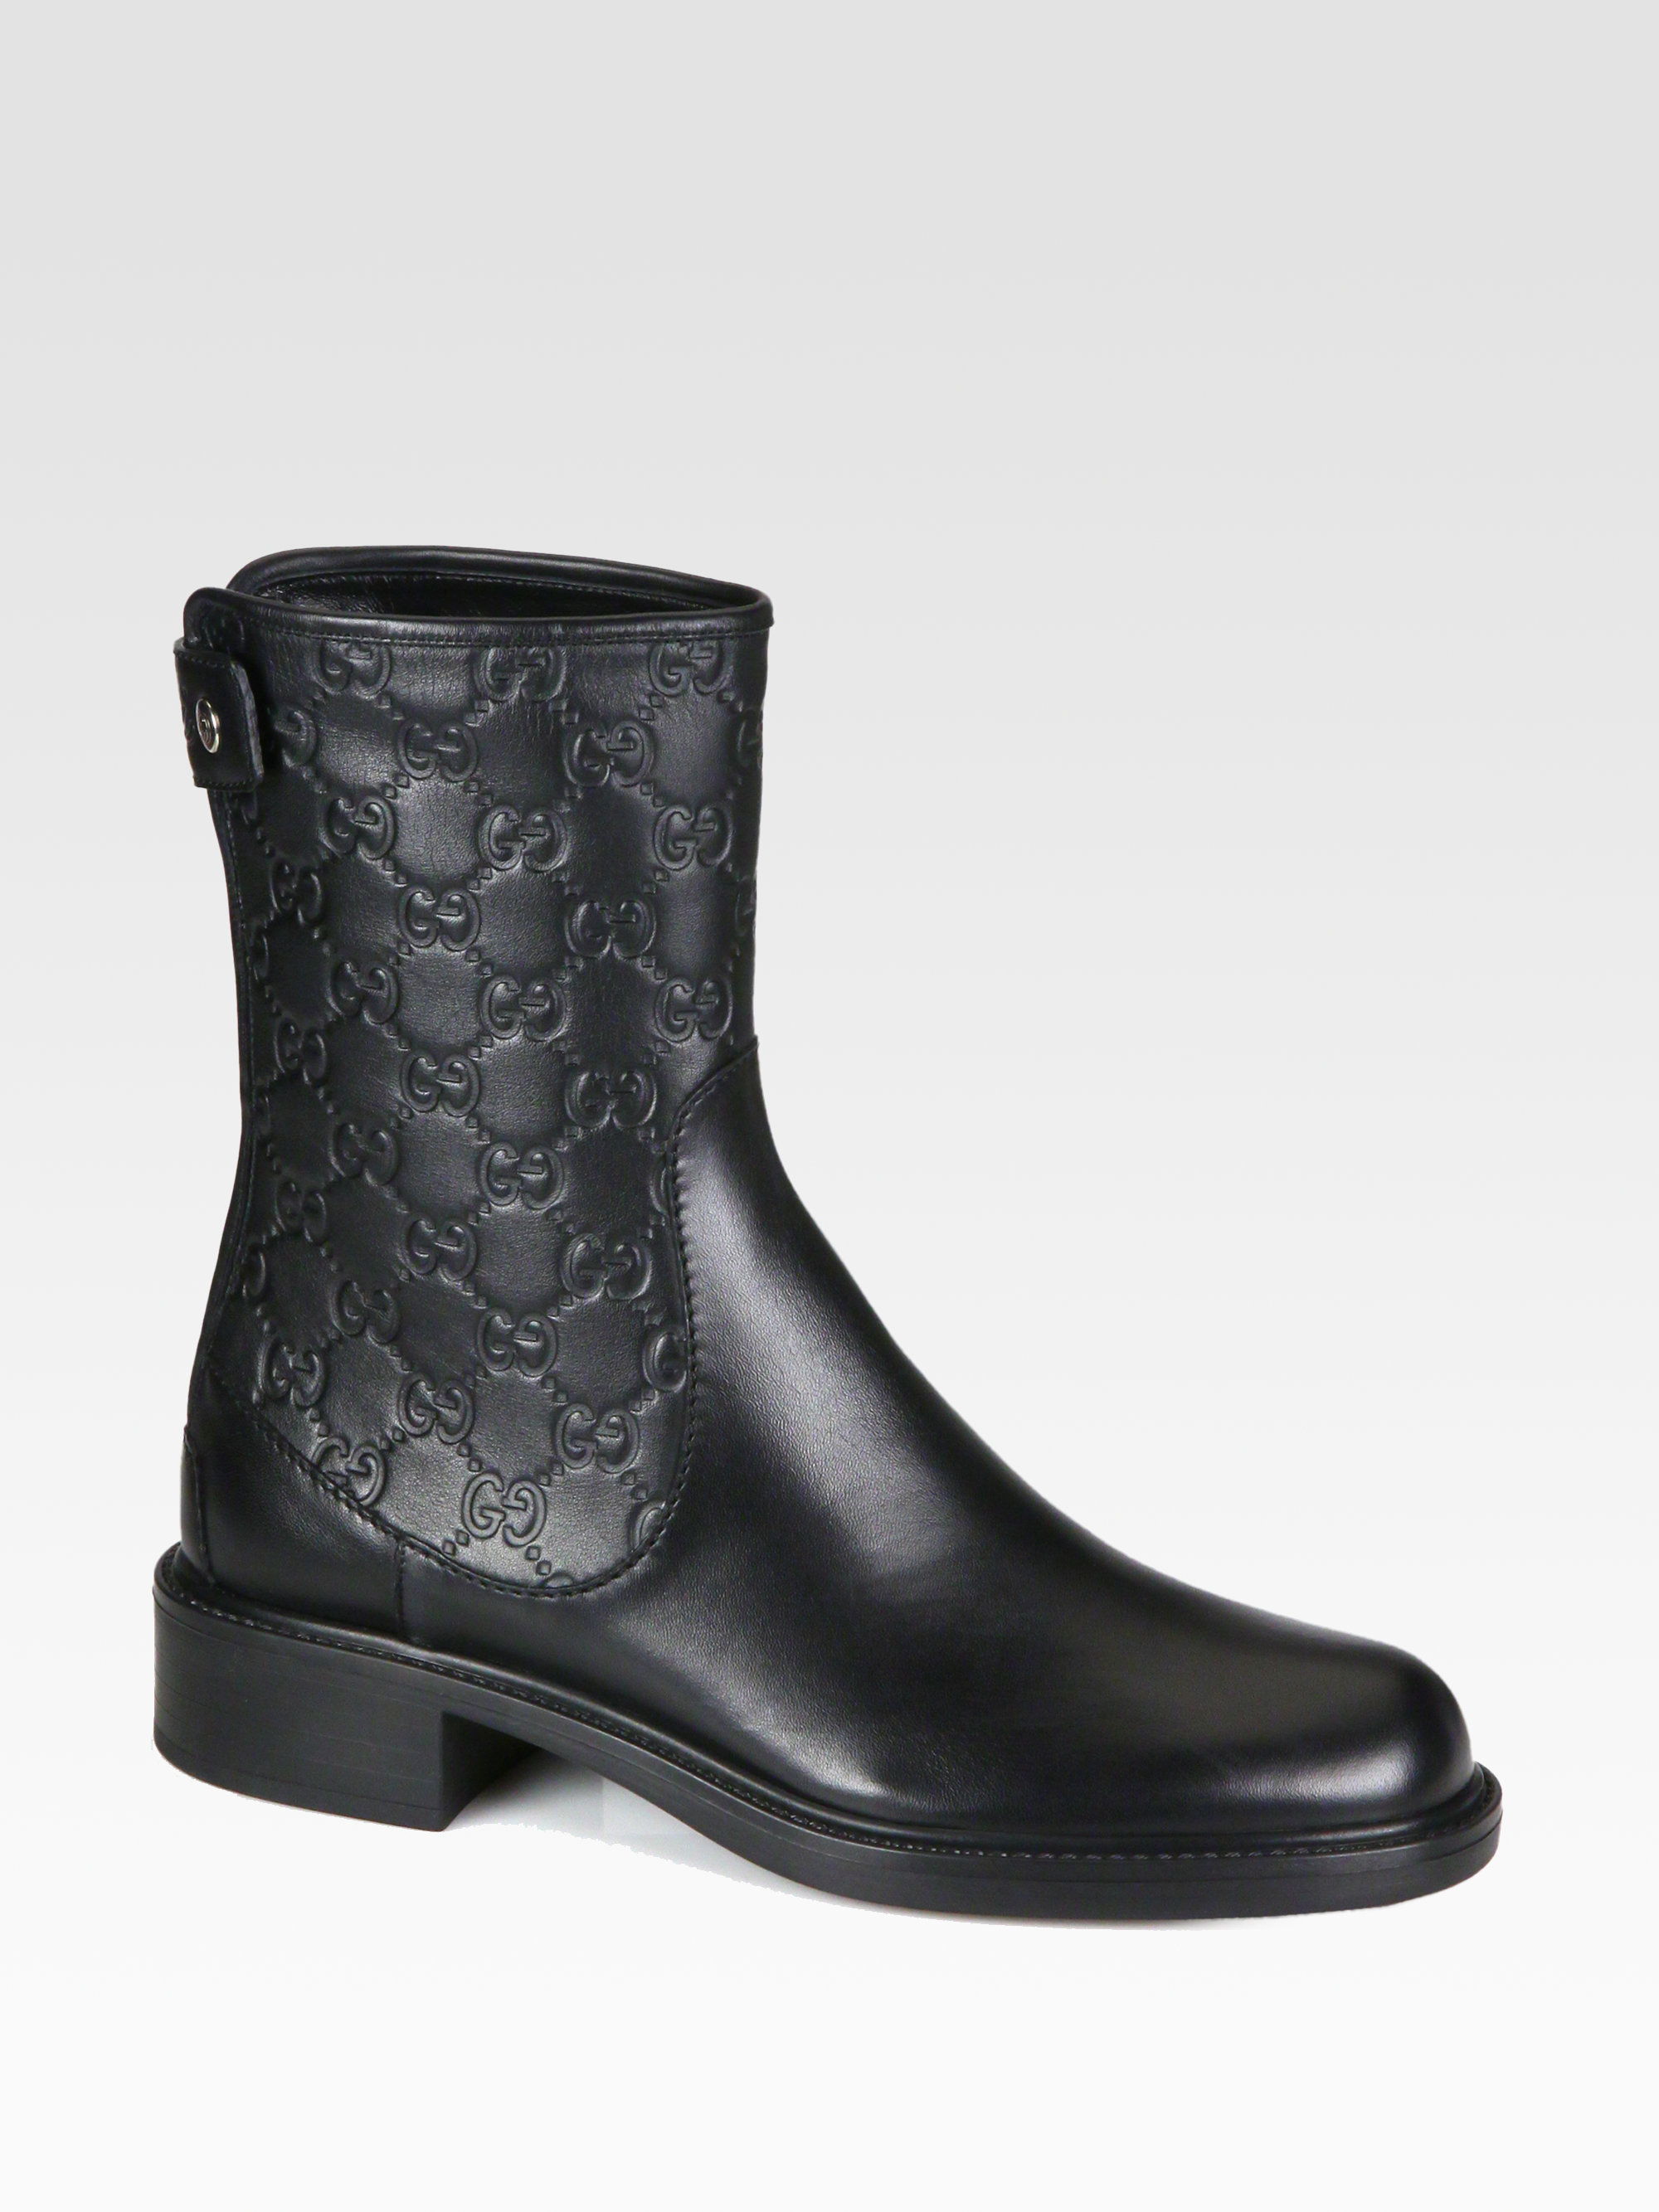 Gucci Gg Leather Ankle Boots in Black | Lyst